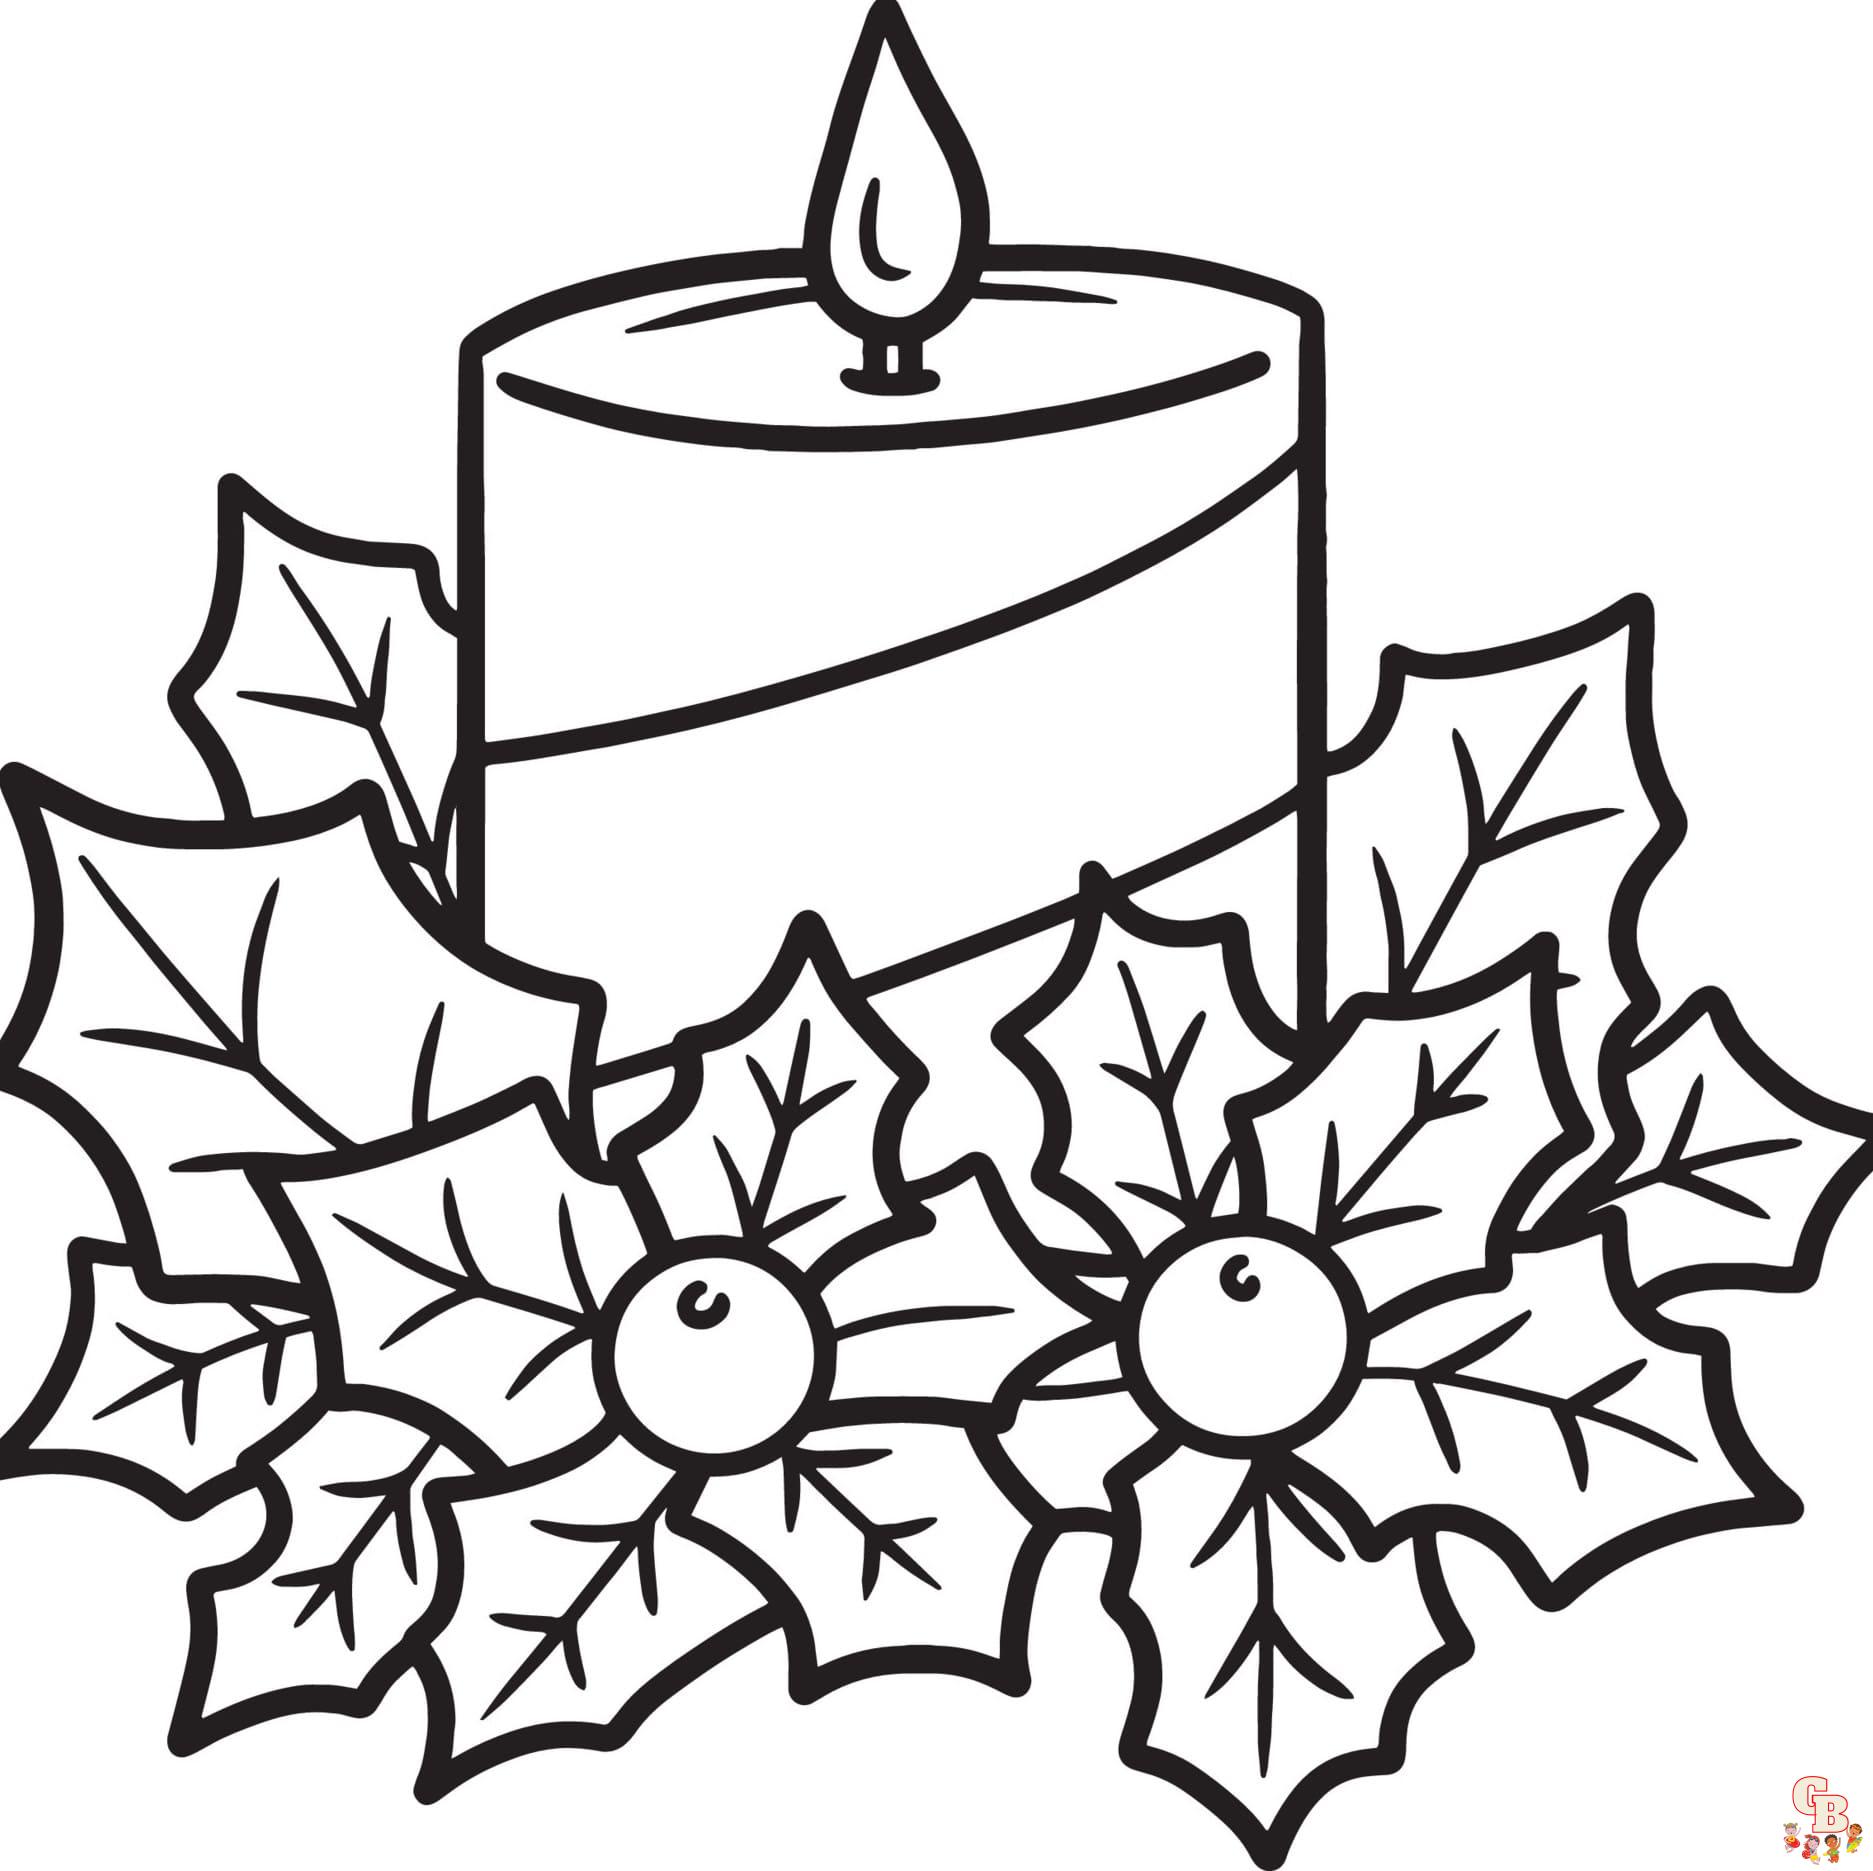 Candle Coloring Pages